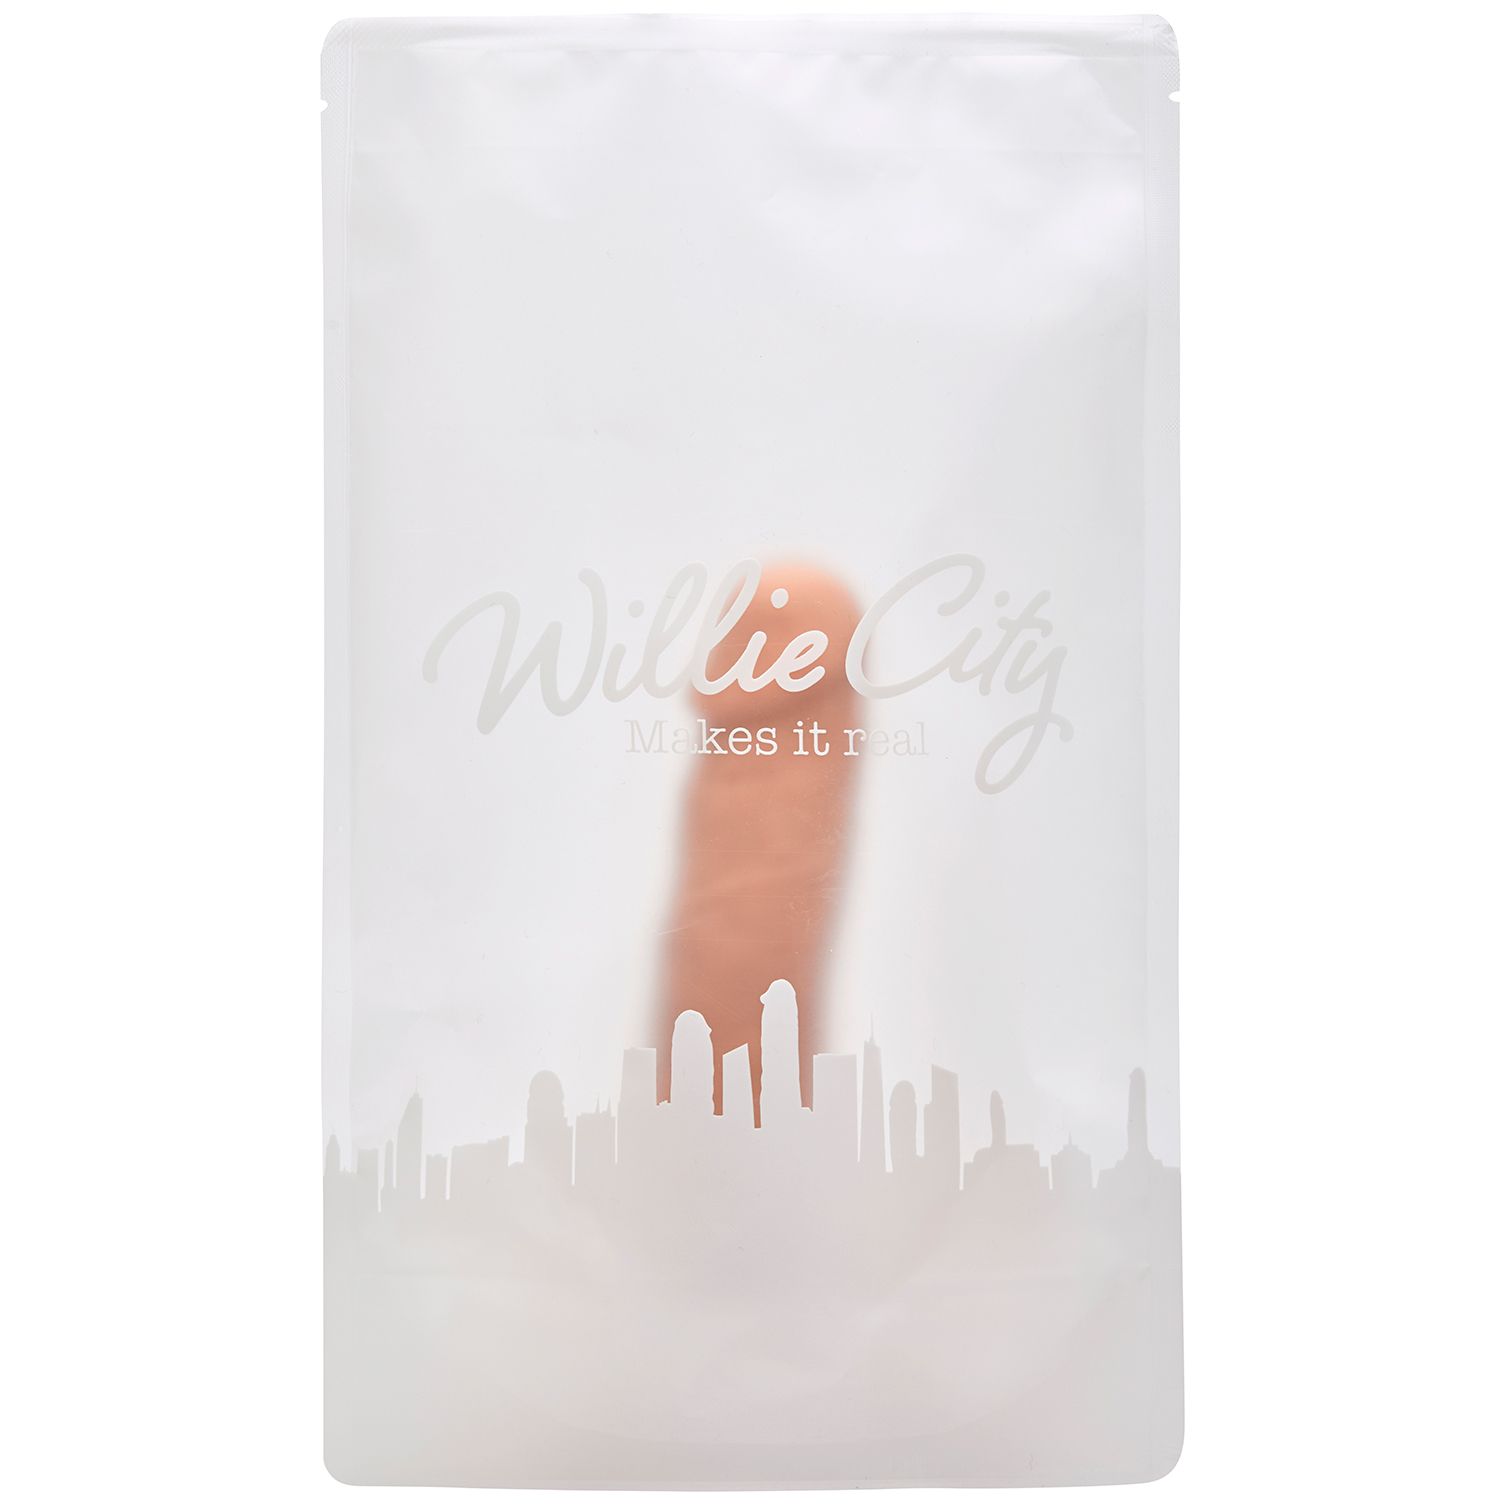 Willie City Luxe Super Realistisk Silikone Dildo 20 cm   - Nude thumbnail